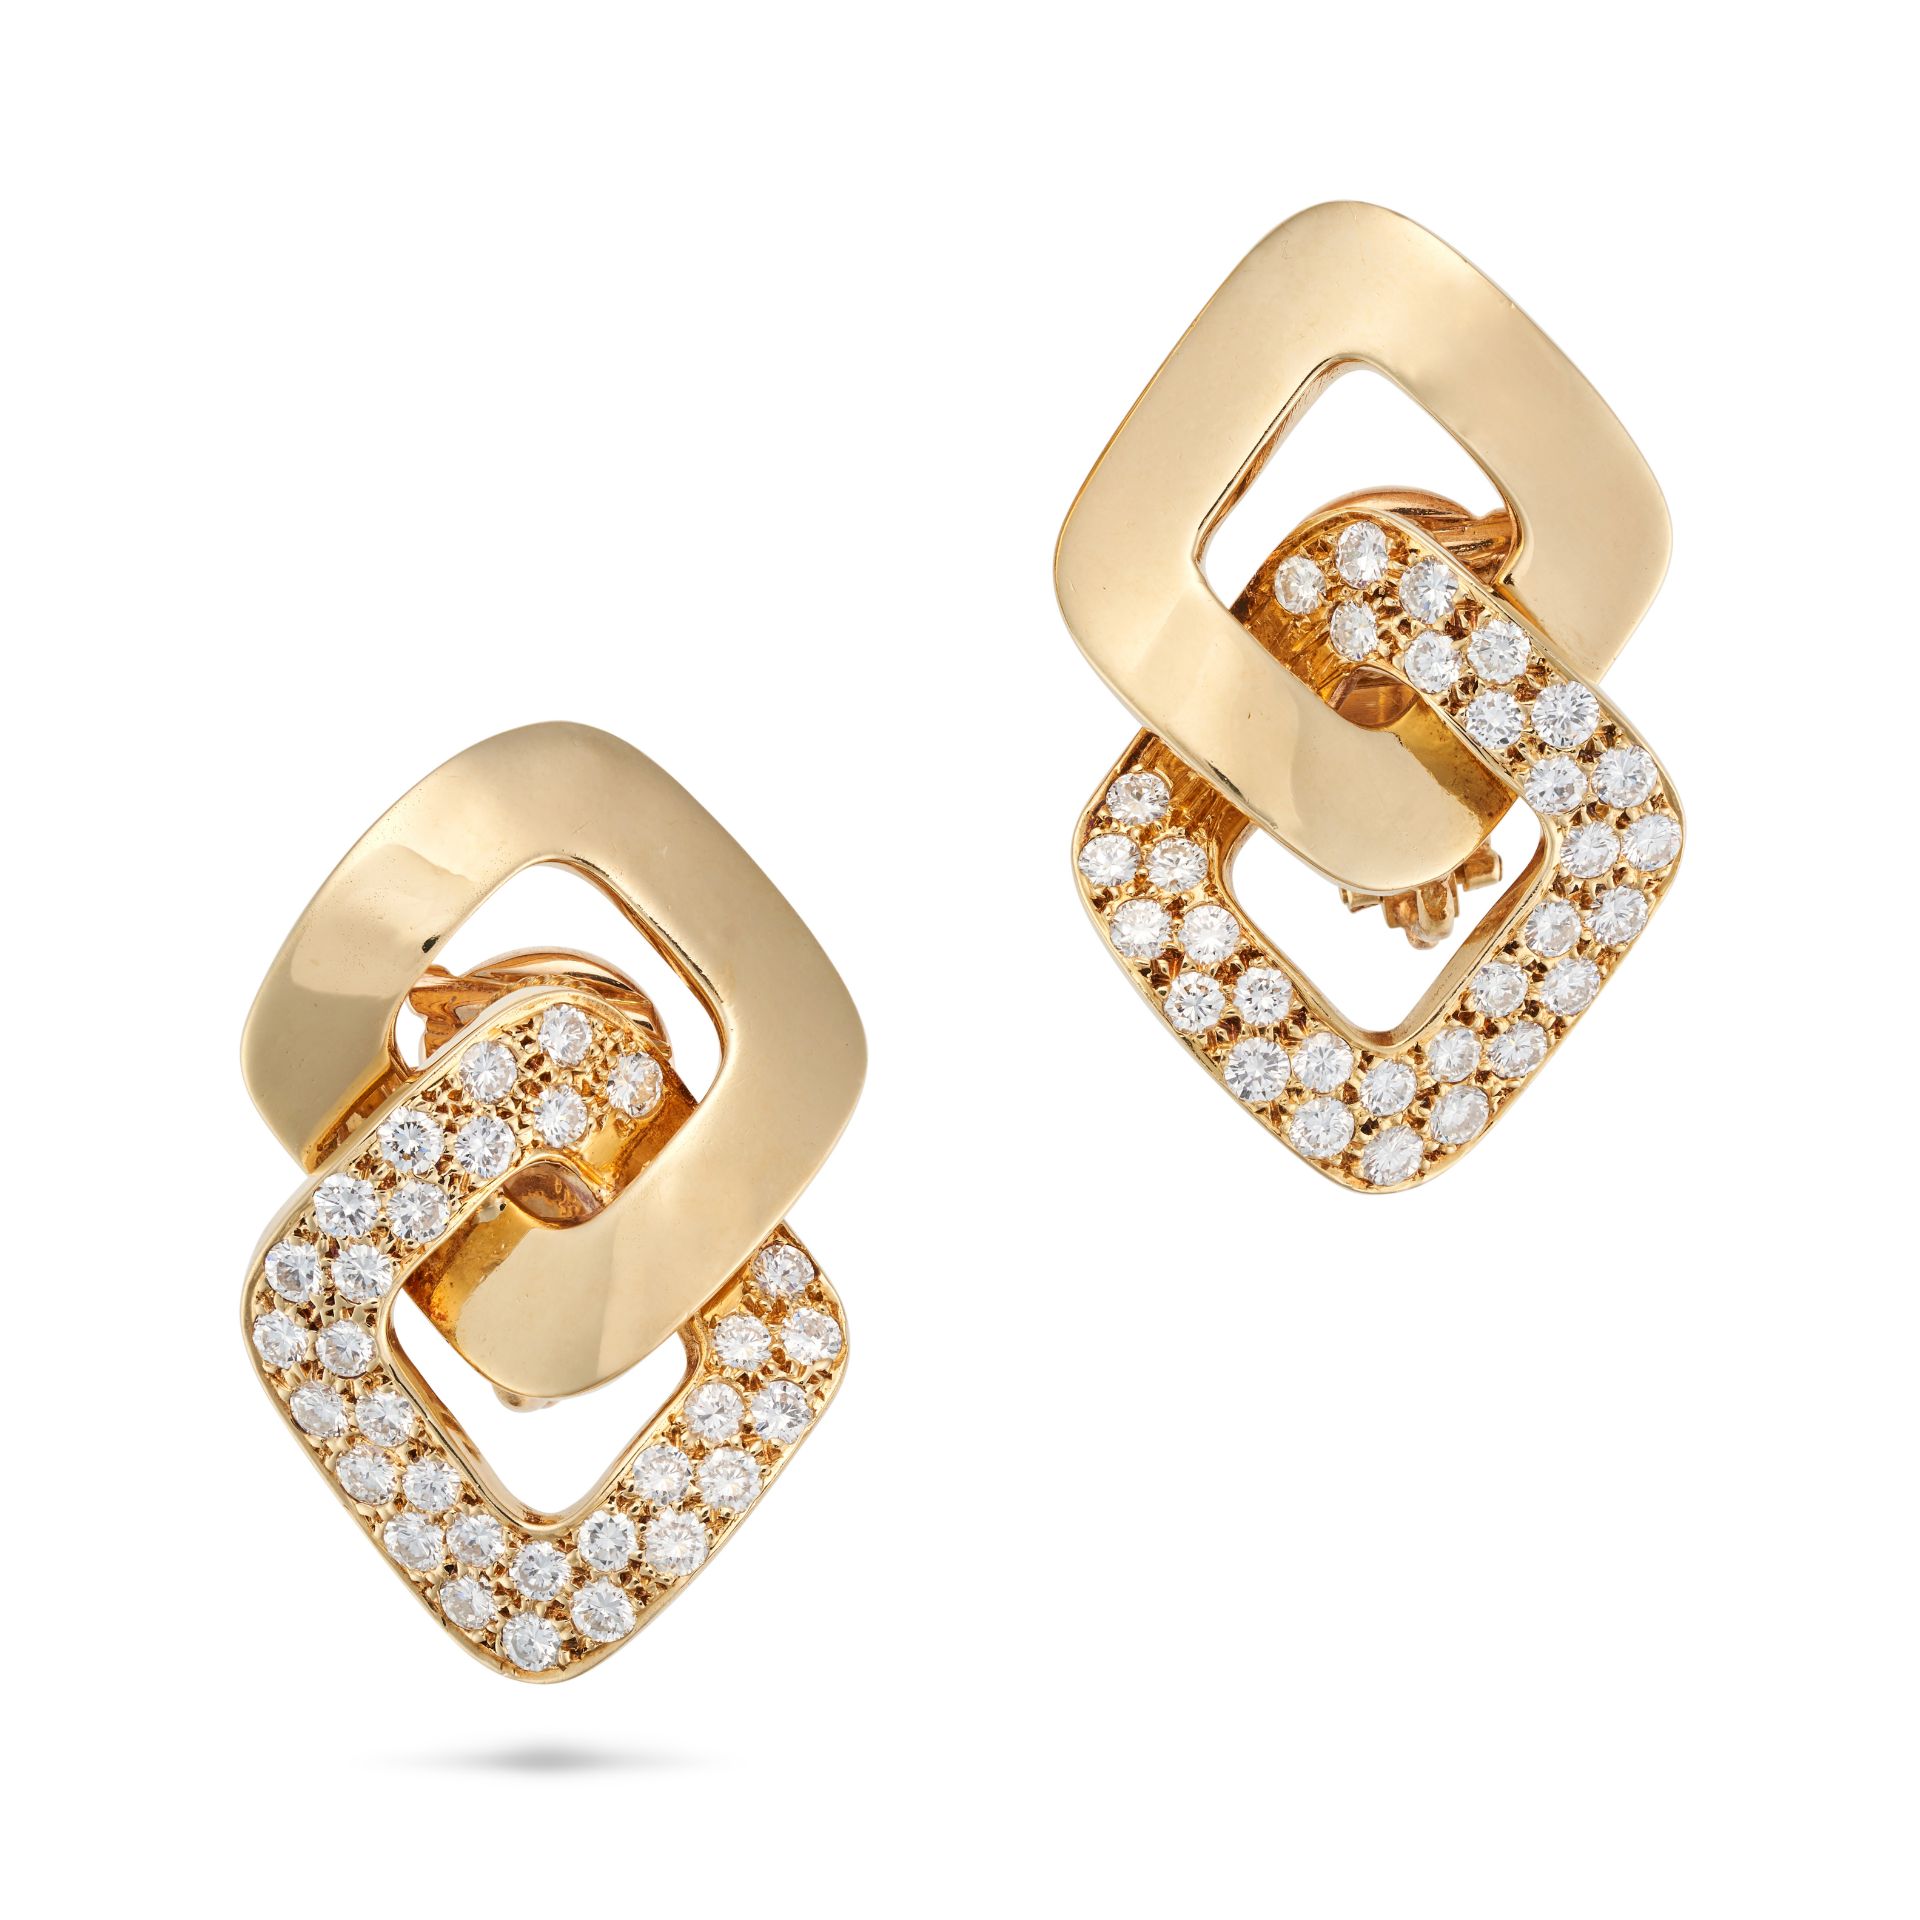 VOURAKIS, A PAIR OF DIAMOND CLIP EARRINGS each comprising two stylised interlocking links, one pa...